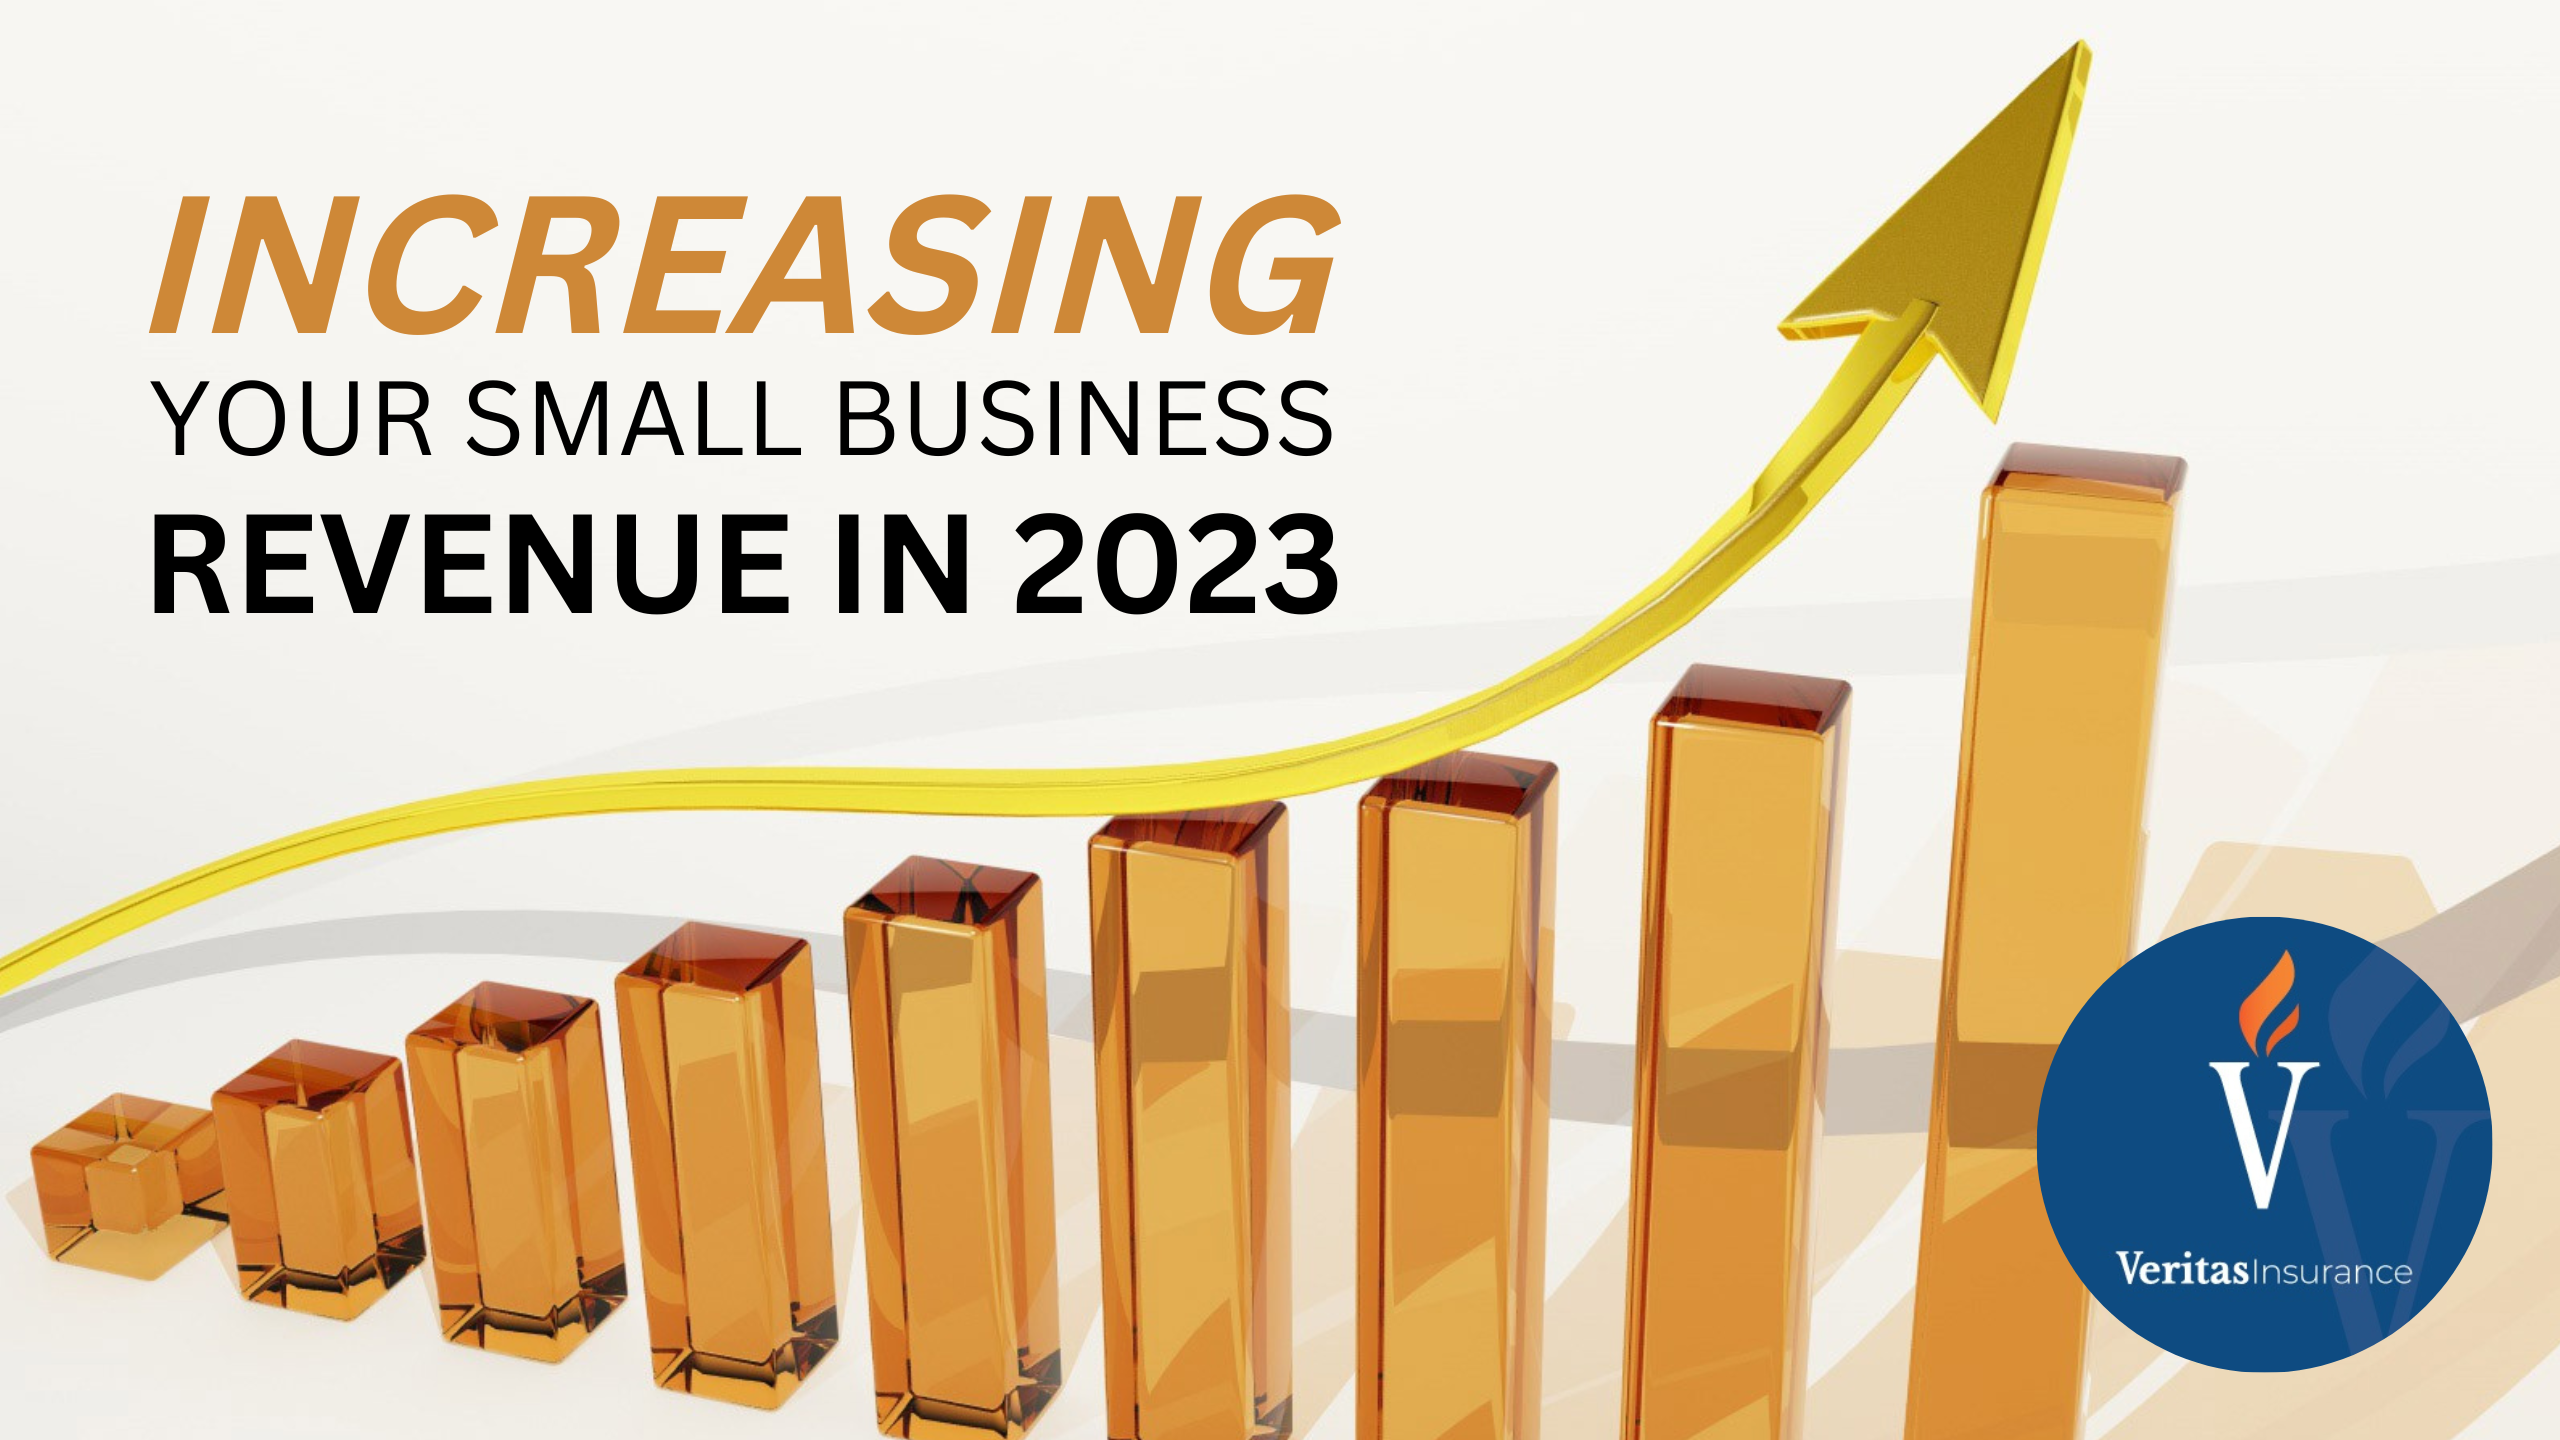 Increase your small business revenue in 2023